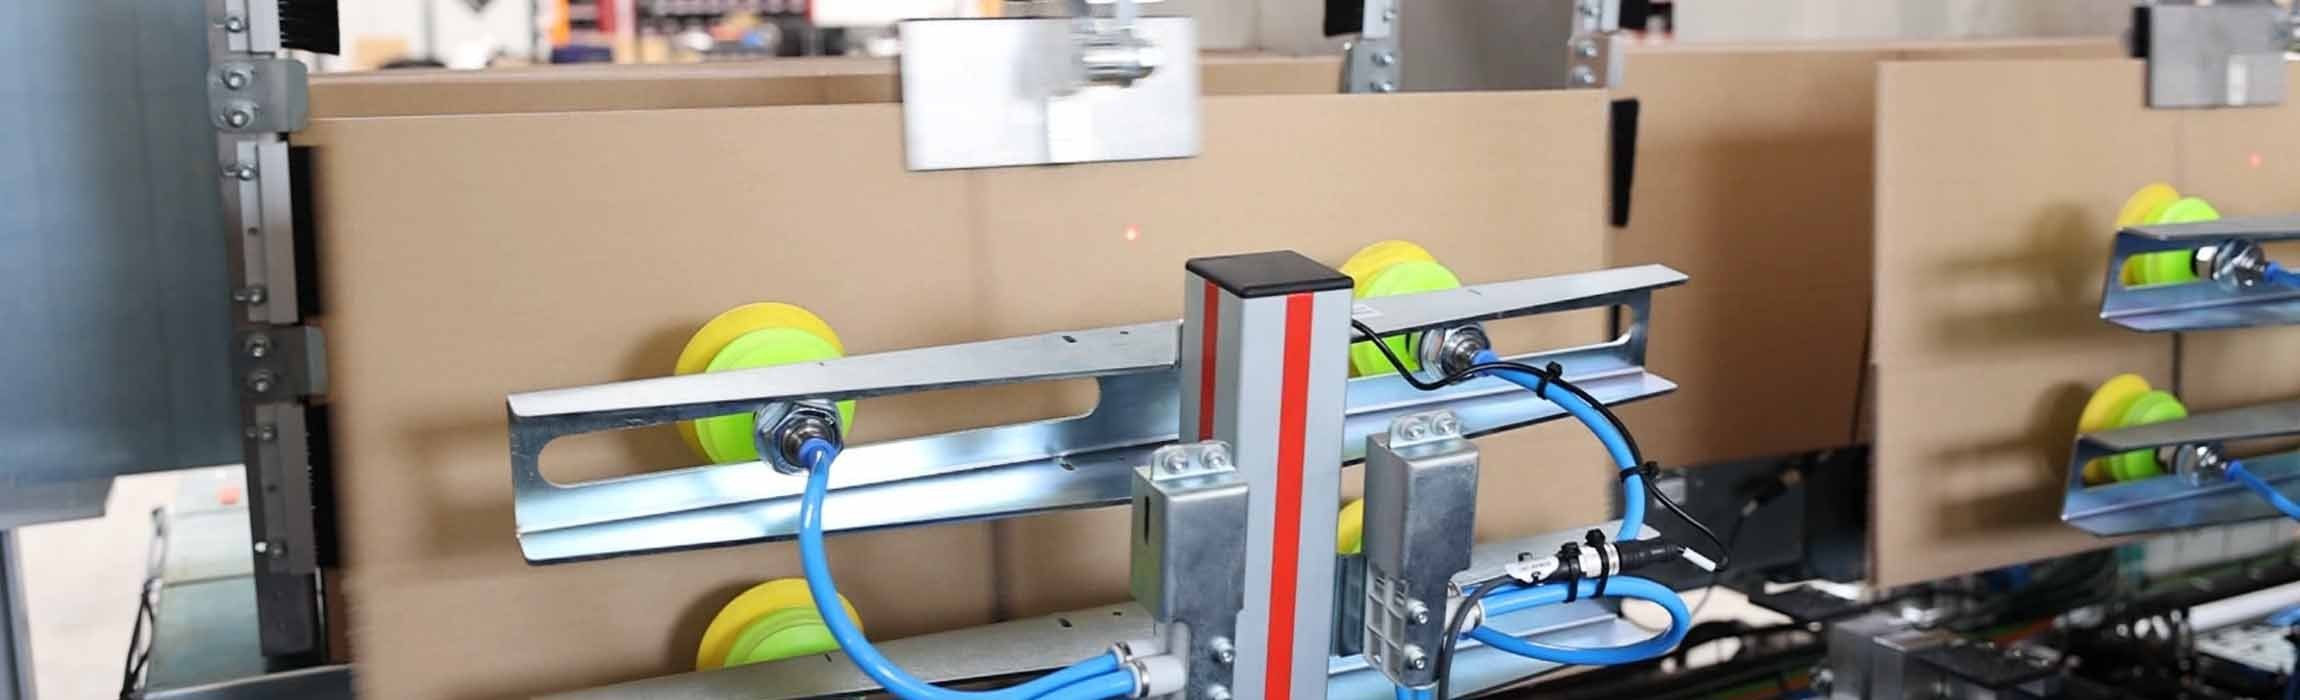 PackChain Assemble: Different carton formats fast and easy built.